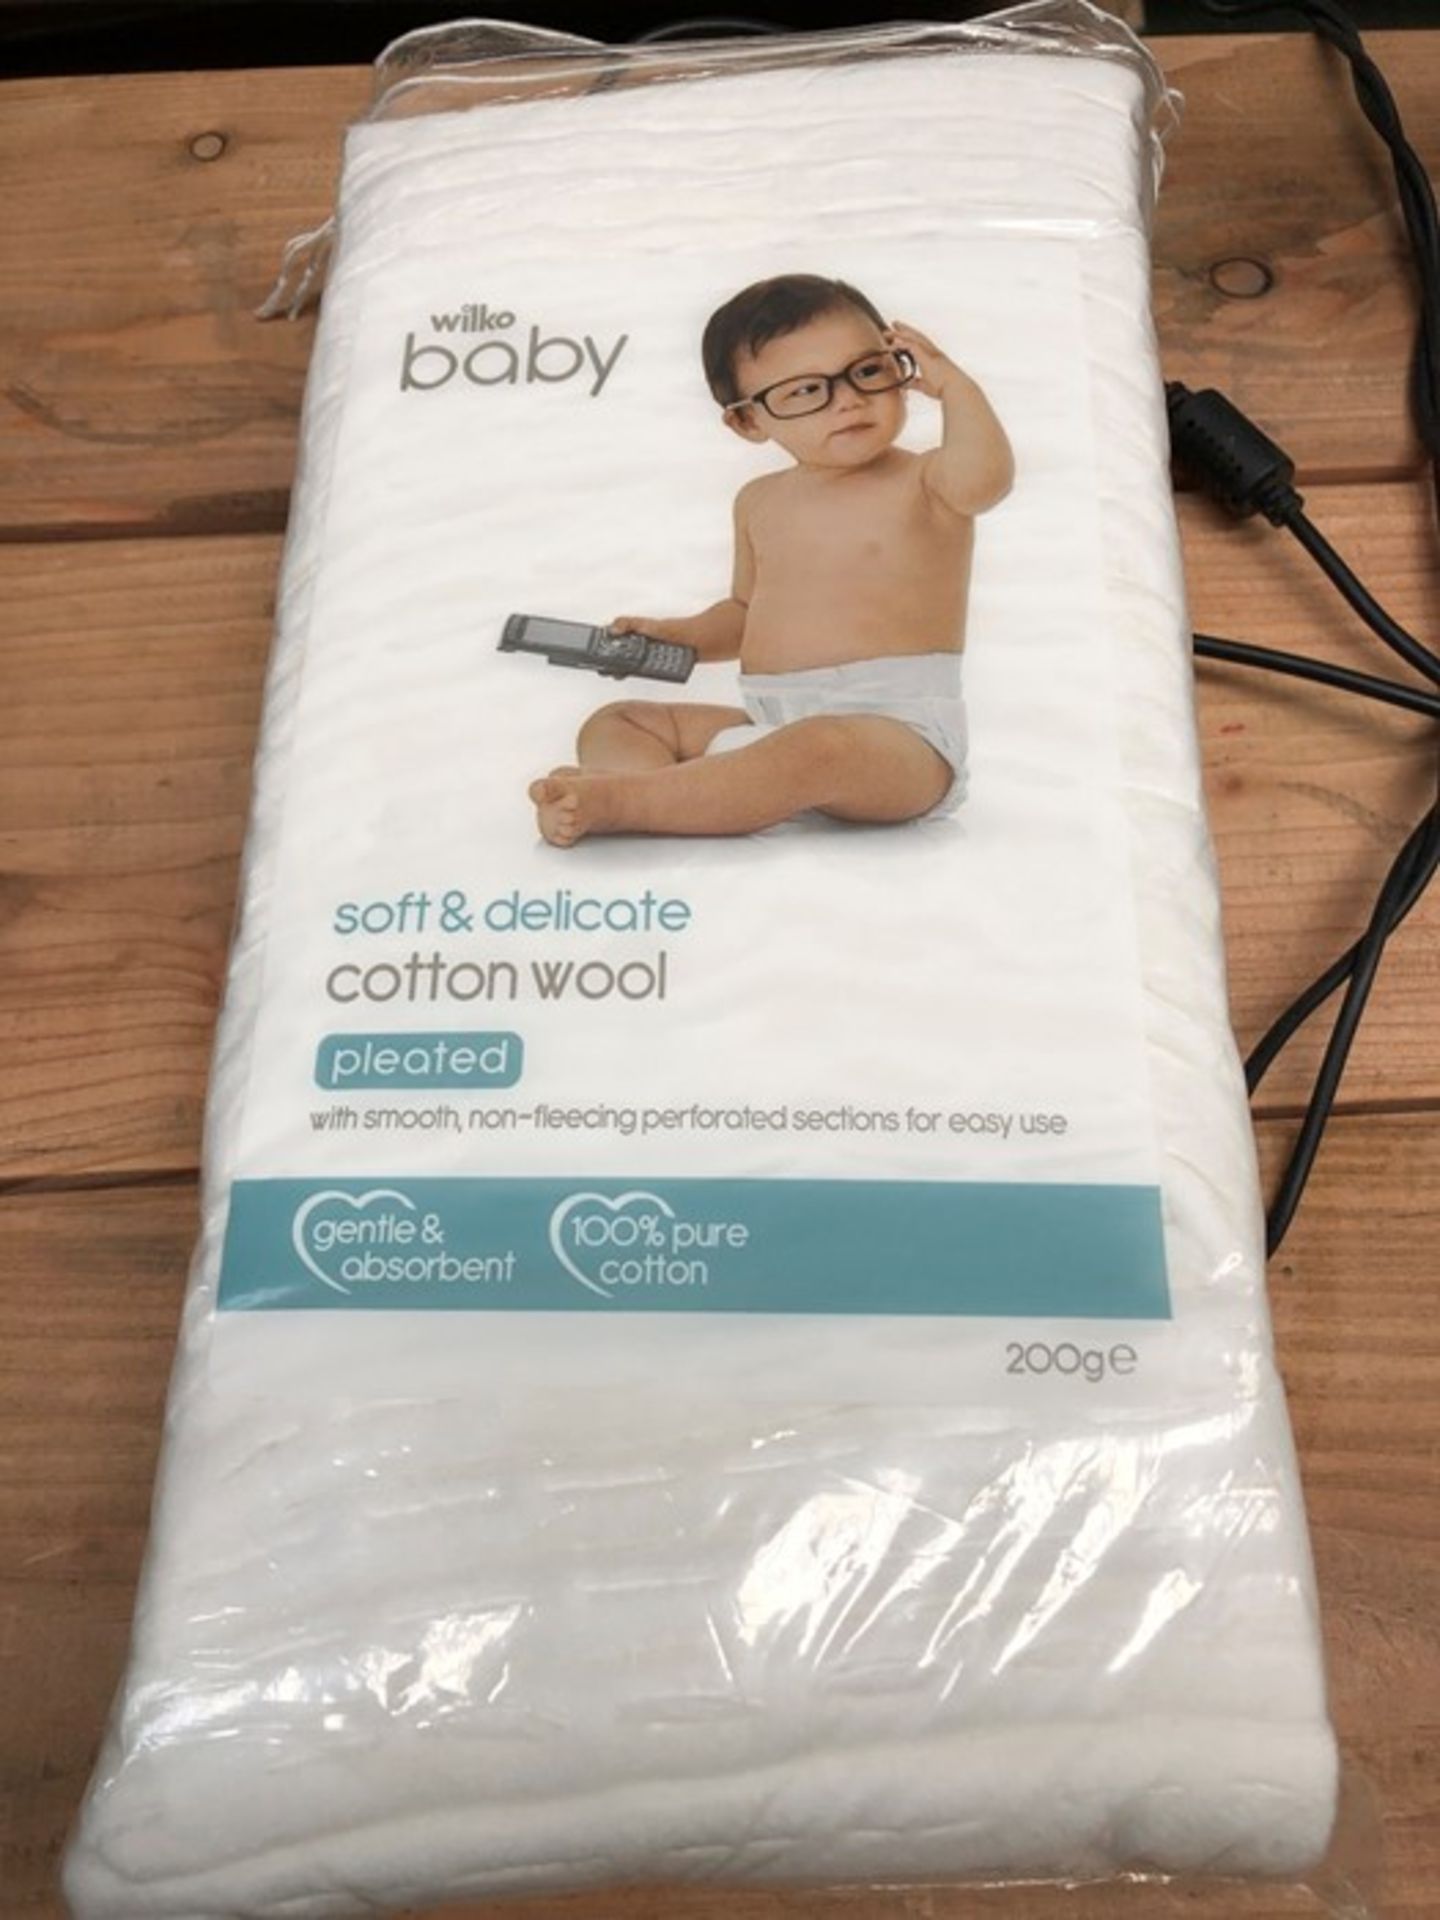 1 LOT TO CONTAIN APPROX 32 BOXES OF WILKO BABY COTTON WOOL PLEAT PACKS / 6 PACKS PER BOX (SOLD AS - Image 2 of 2